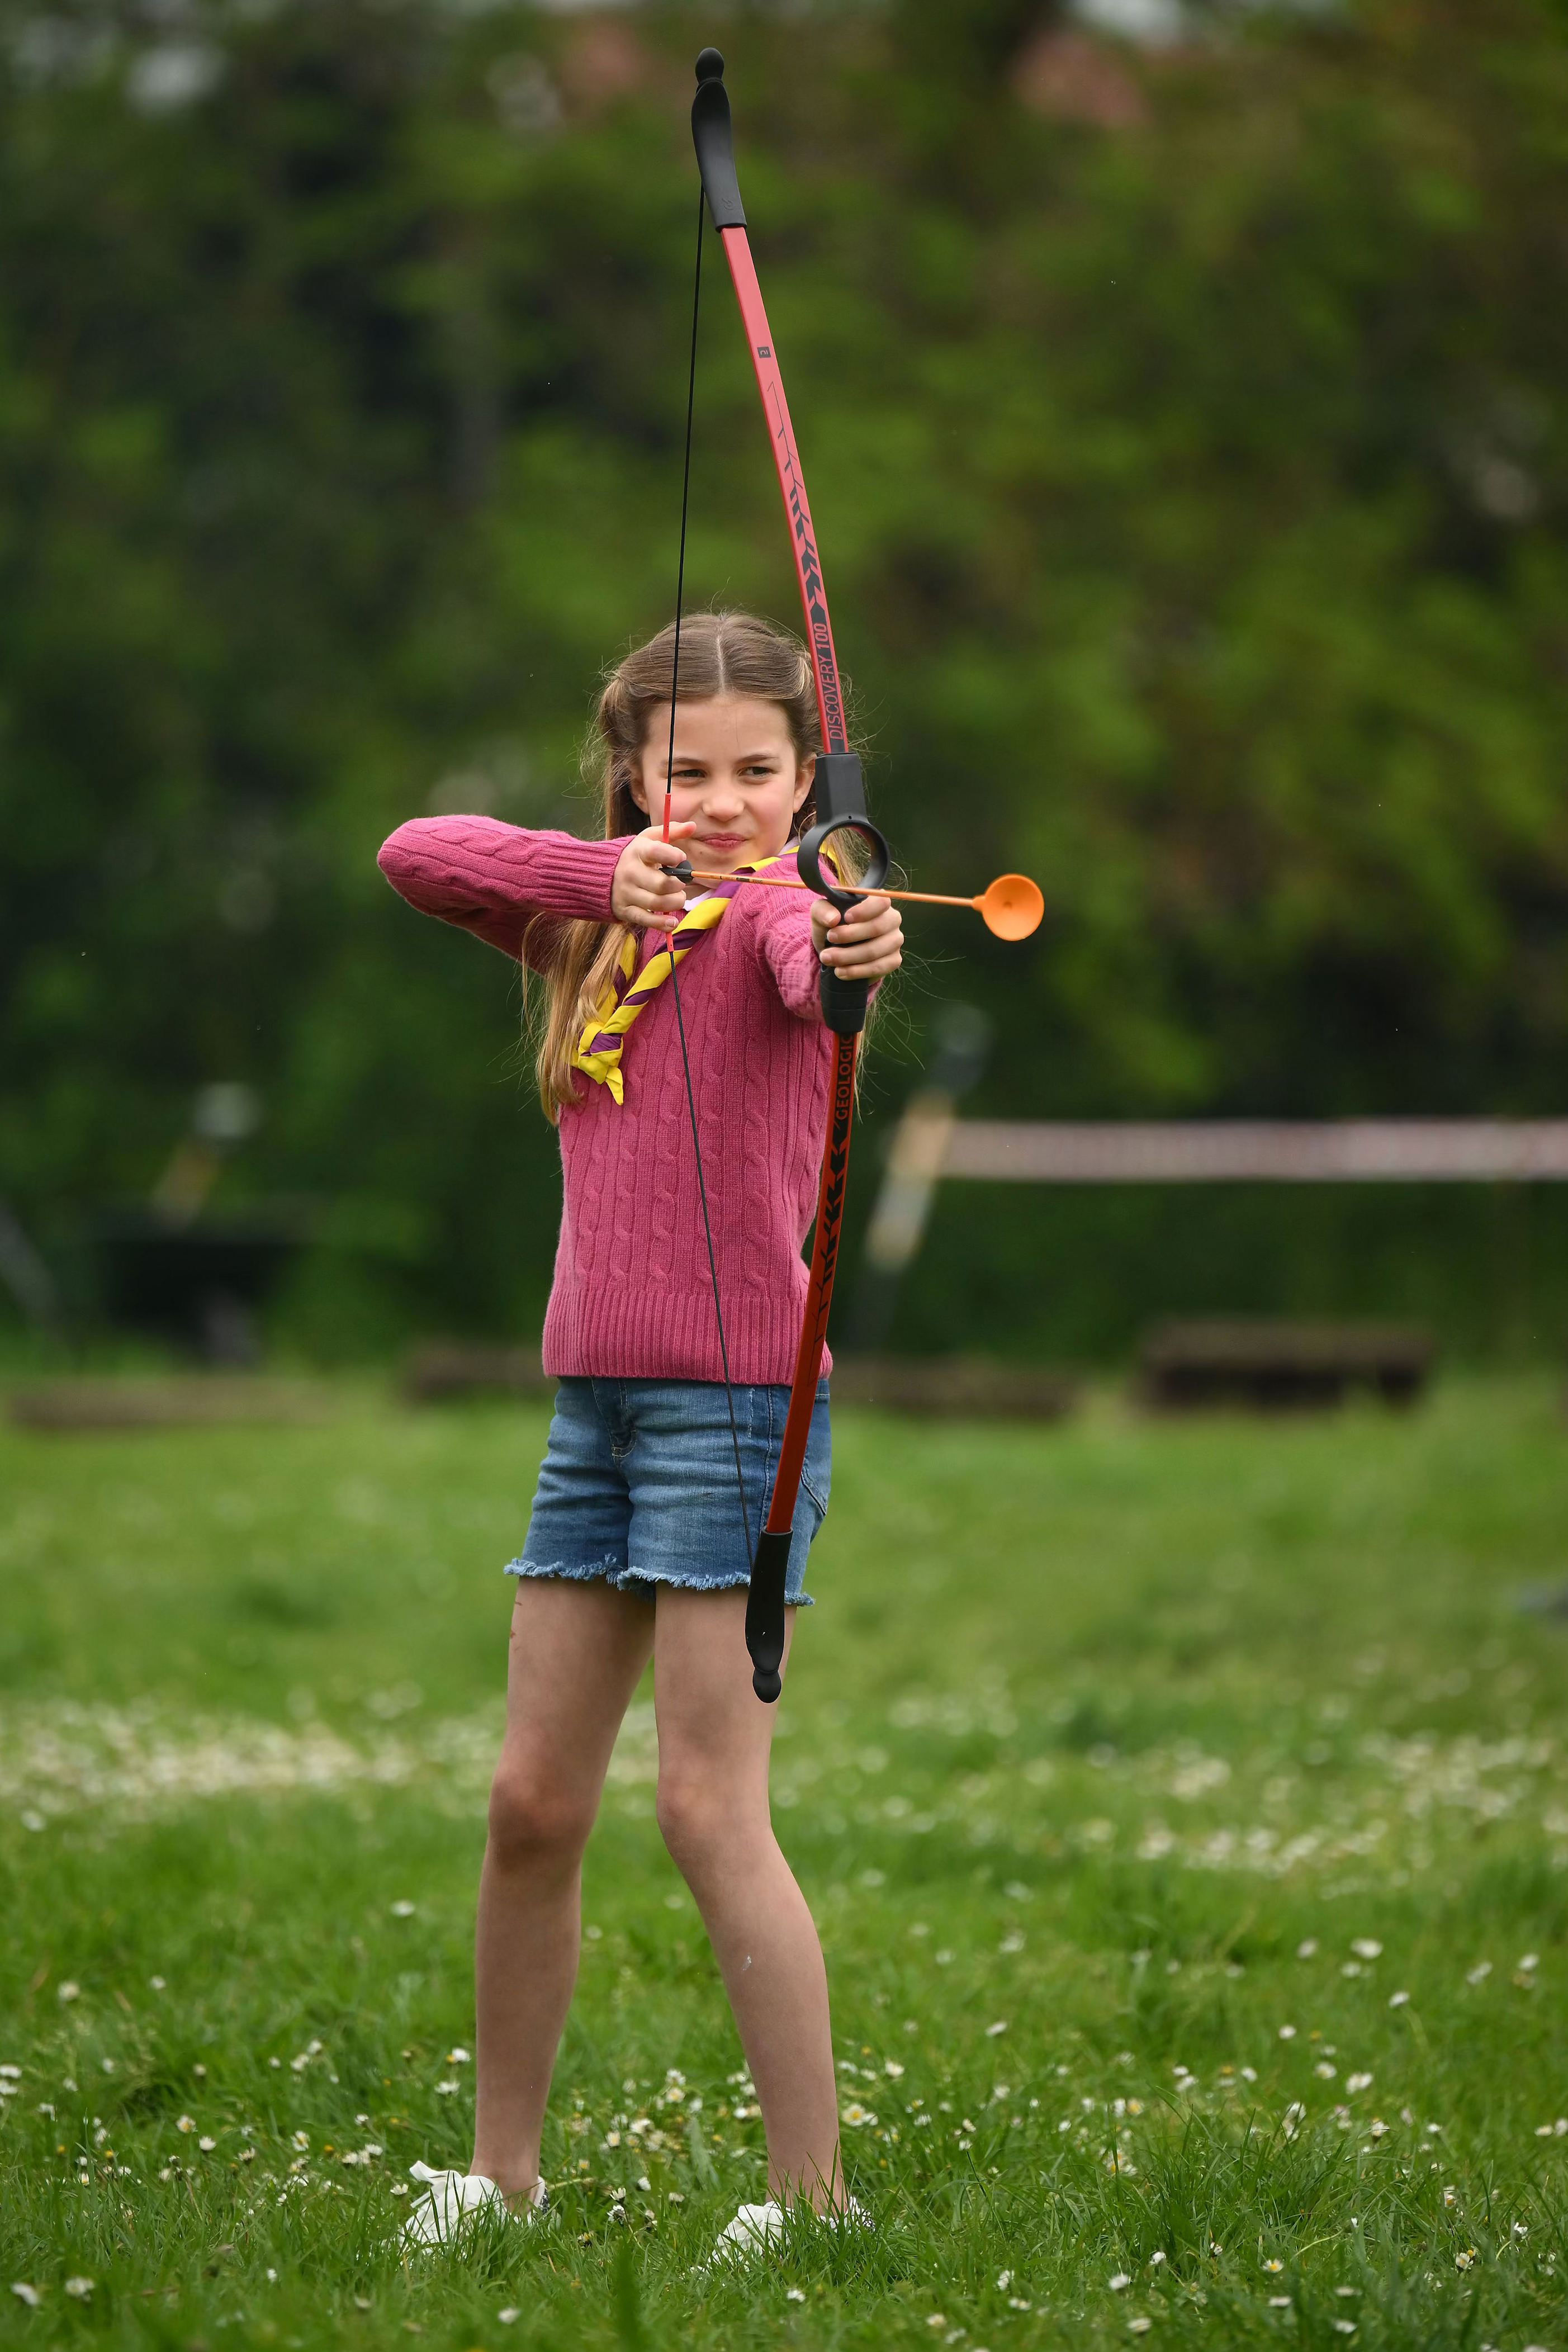 <p>Princess Charlotte tried her hand at archery while taking part in the Big Help Out volunteering drive -- the final event of grandfather King Charles III's <a href="https://www.wonderwall.com/celebrity/the-coronation-of-king-charles-iii-and-queen-camilla-the-best-pictures-of-all-the-royals-at-this-historic-event-735015.gallery">coronation</a> festivities -- during a visit to the 3rd Upton Scouts Hut in Slough, England, on May 8, 2023, where she and her siblings and parents helped to renovate and improve the building during their visit.</p>